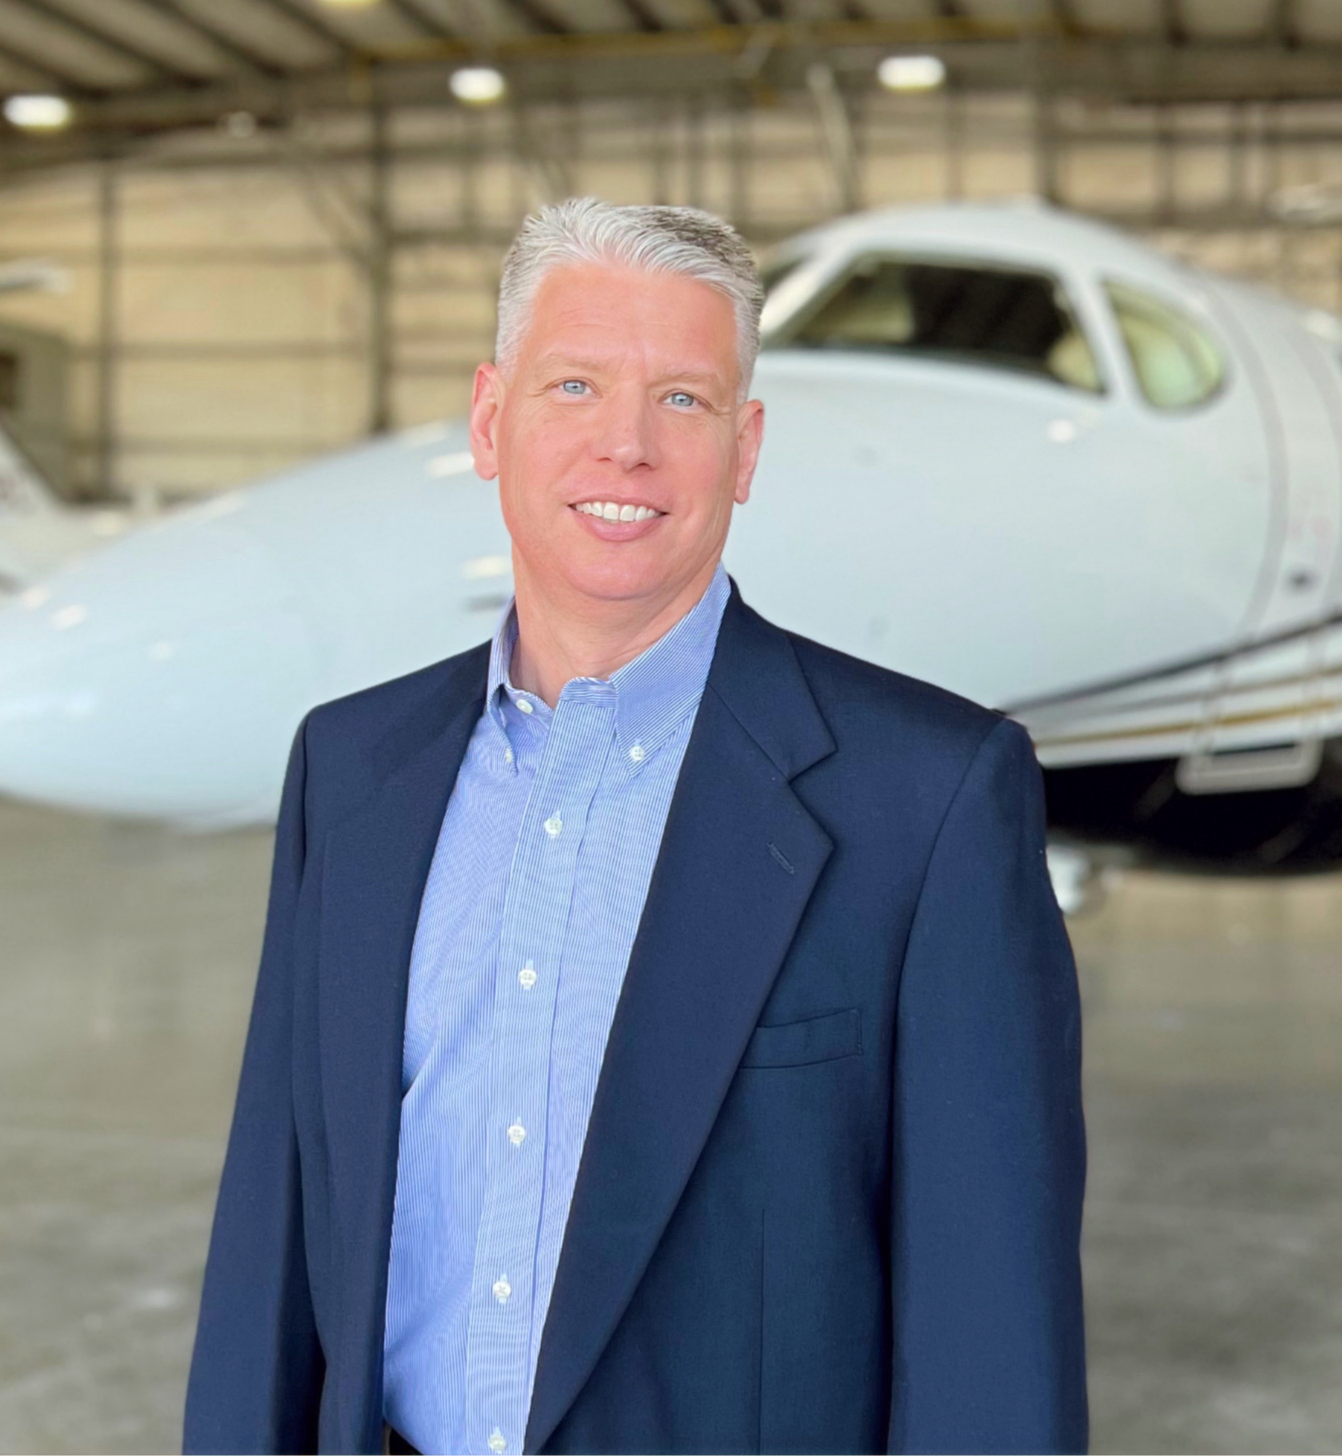 BOLDJets Welcomes Todd Storm As VP Of Operations